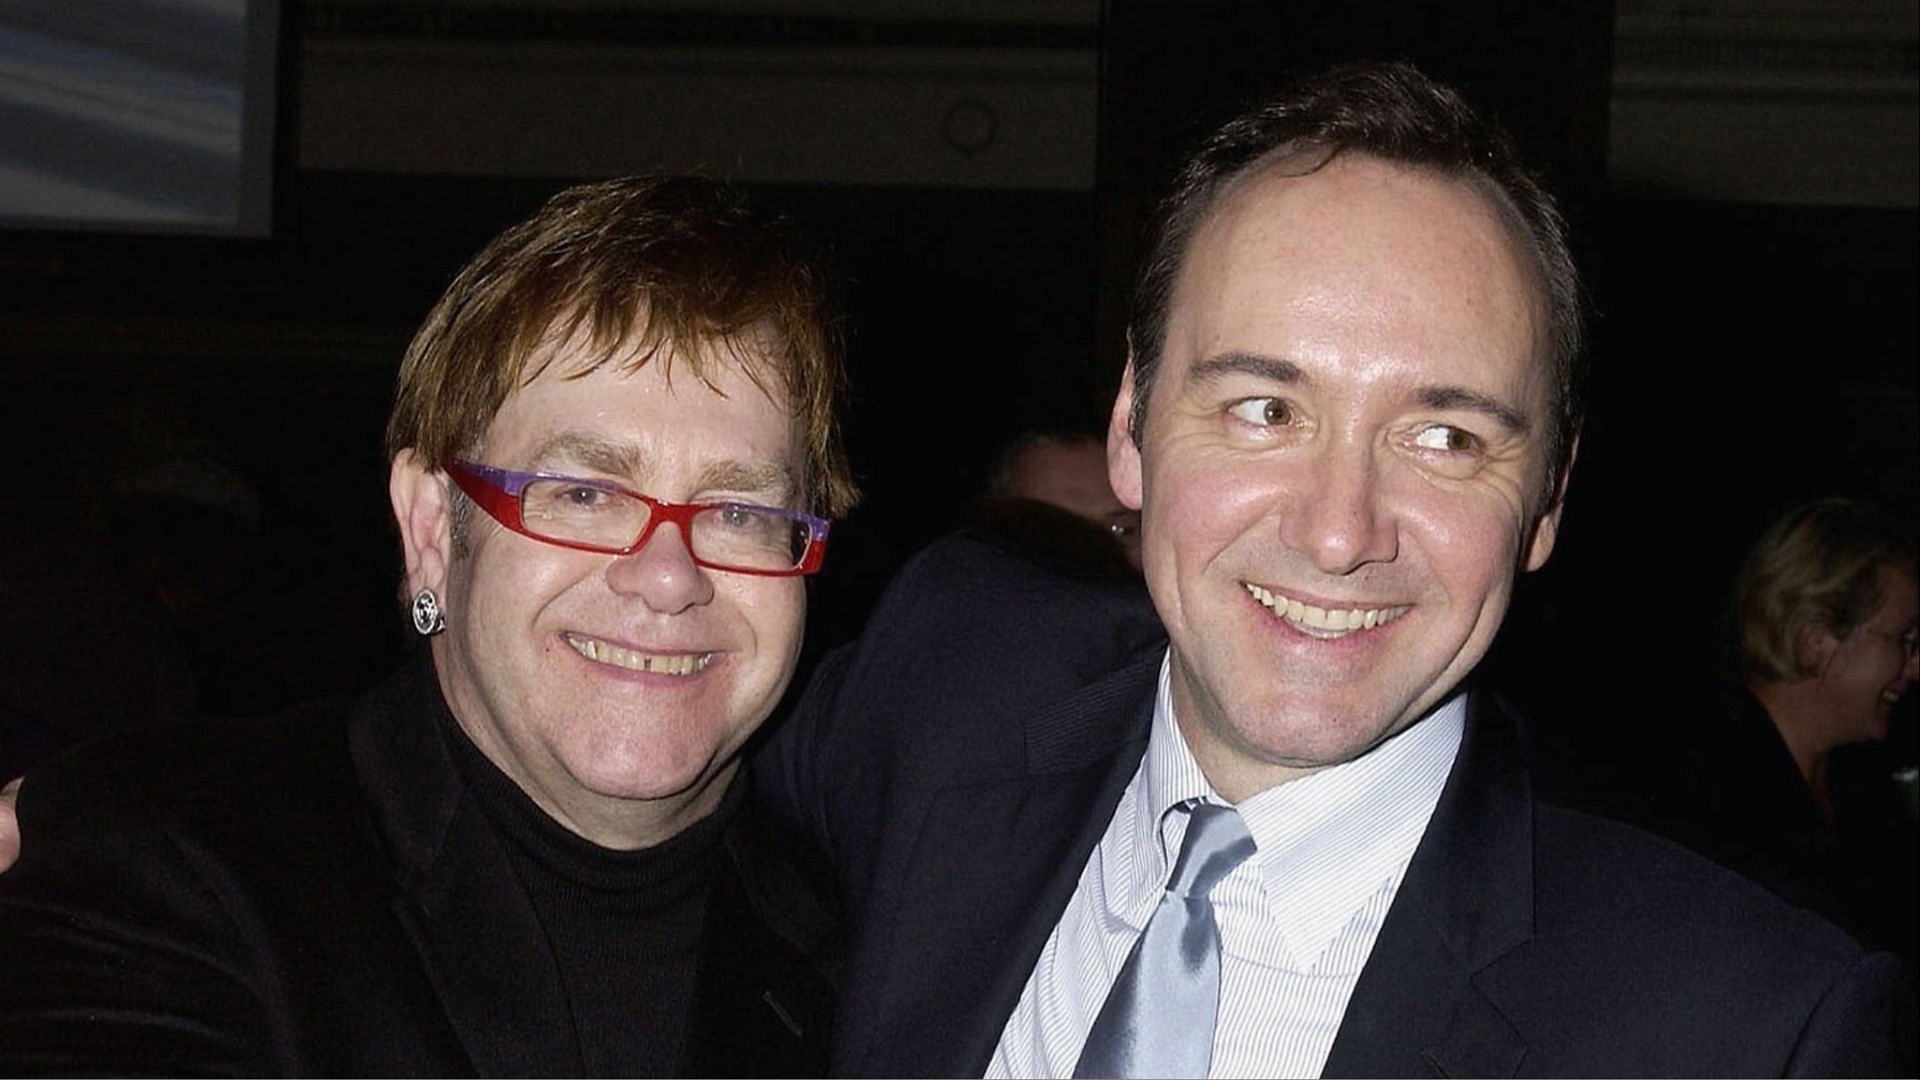 Sir Elton John and Kevin Spacey pictured together at the Nordoff Robbins Music Therapy Charity Dinner in 2005. (Image via Dave Bennet/Getty Images)